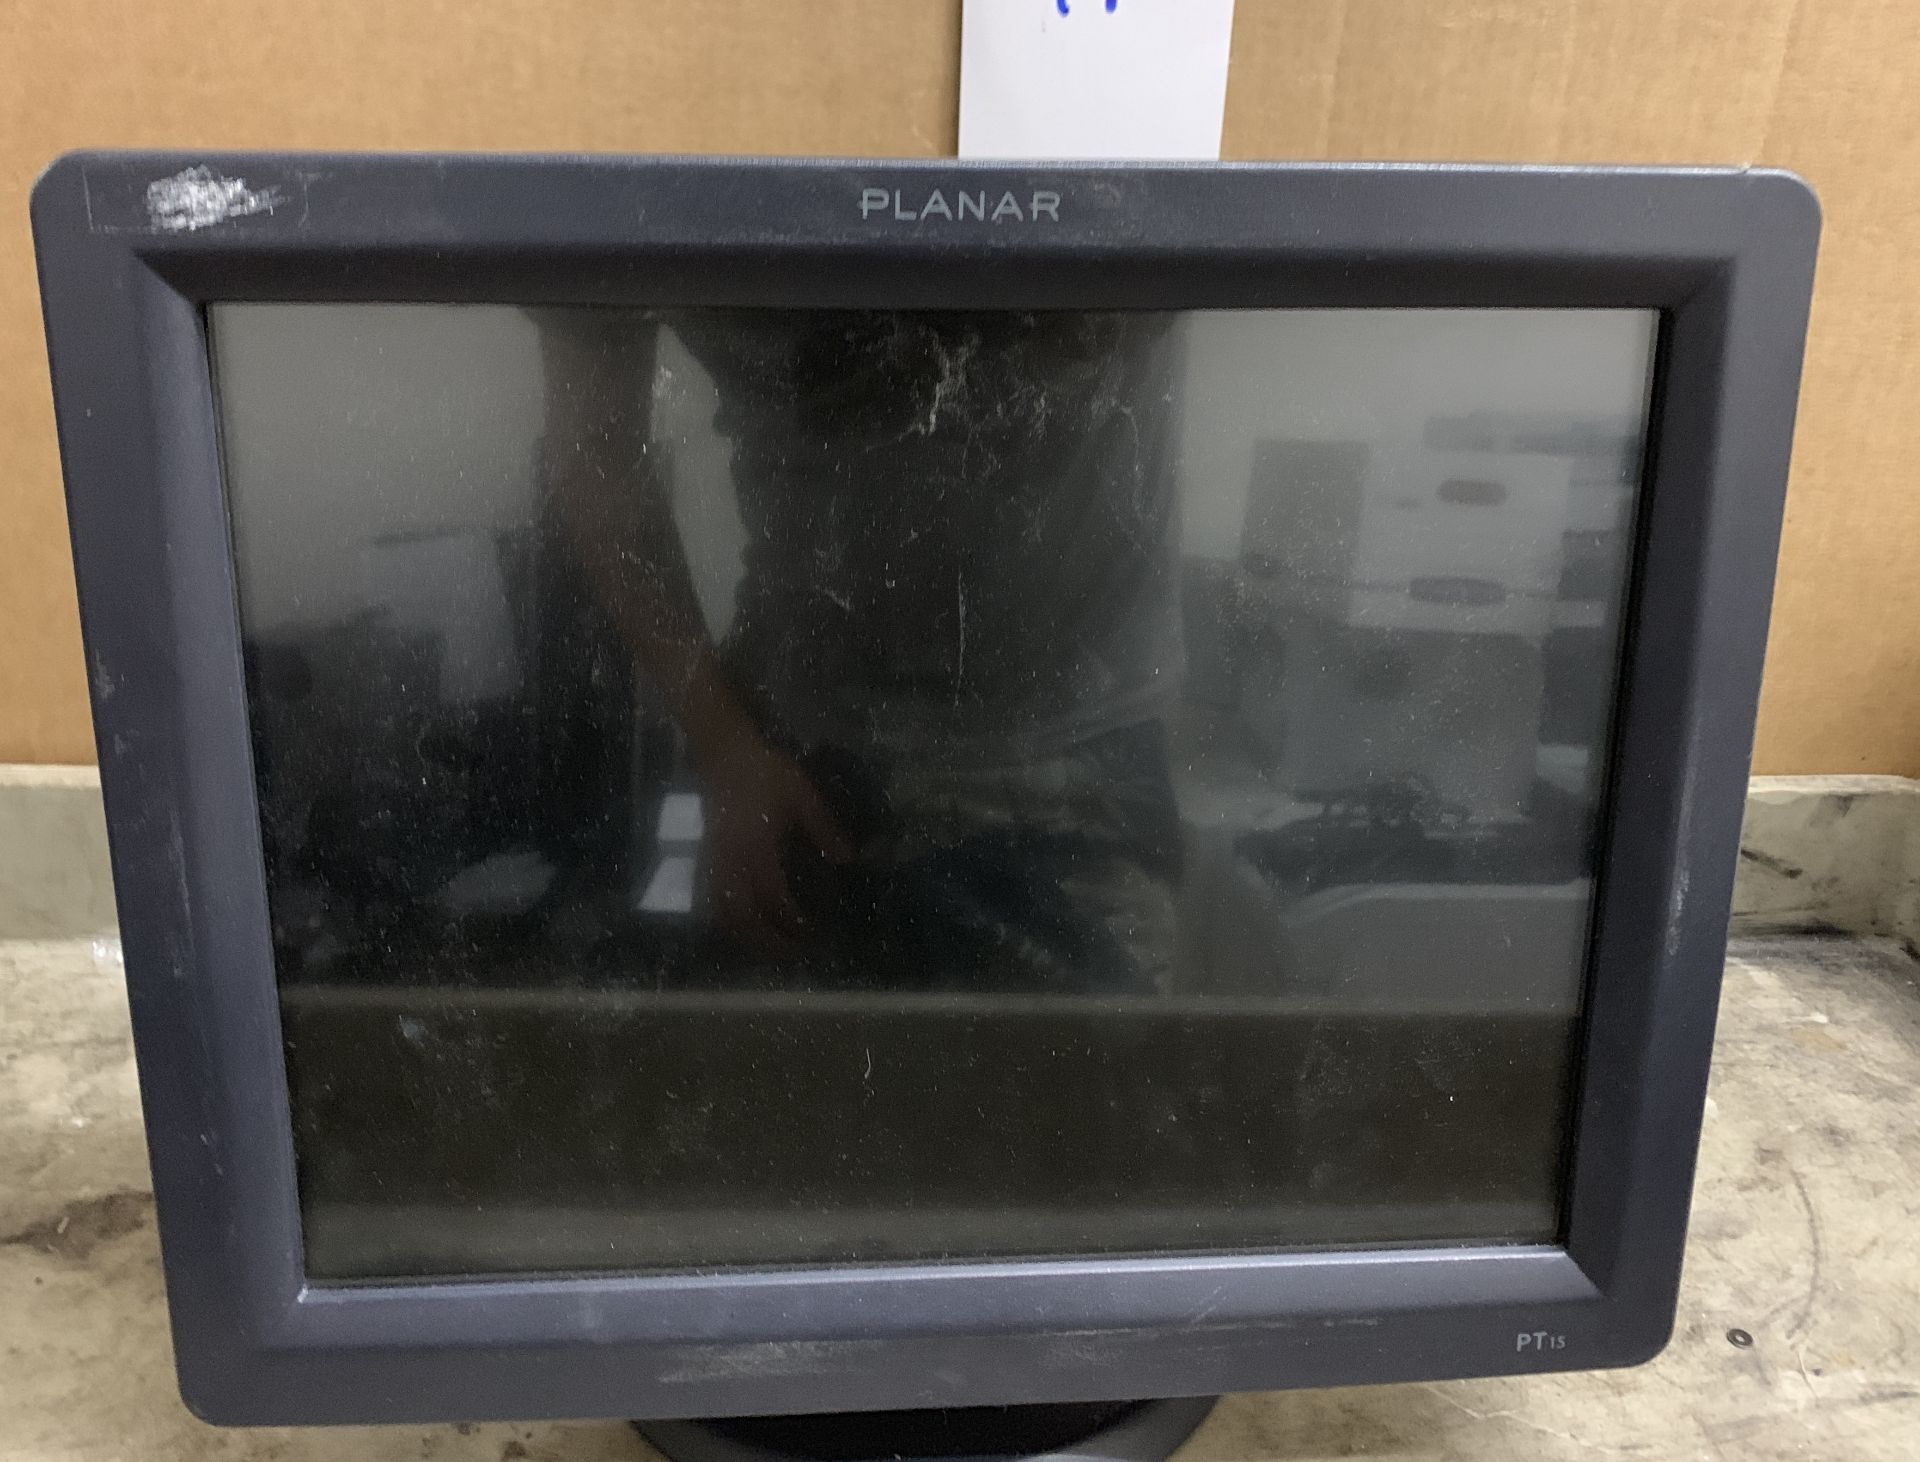 4 X Planar PT1575S-BK 15" LCD Monitor $400 A SCREEN USED ON EBAY - Image 2 of 3